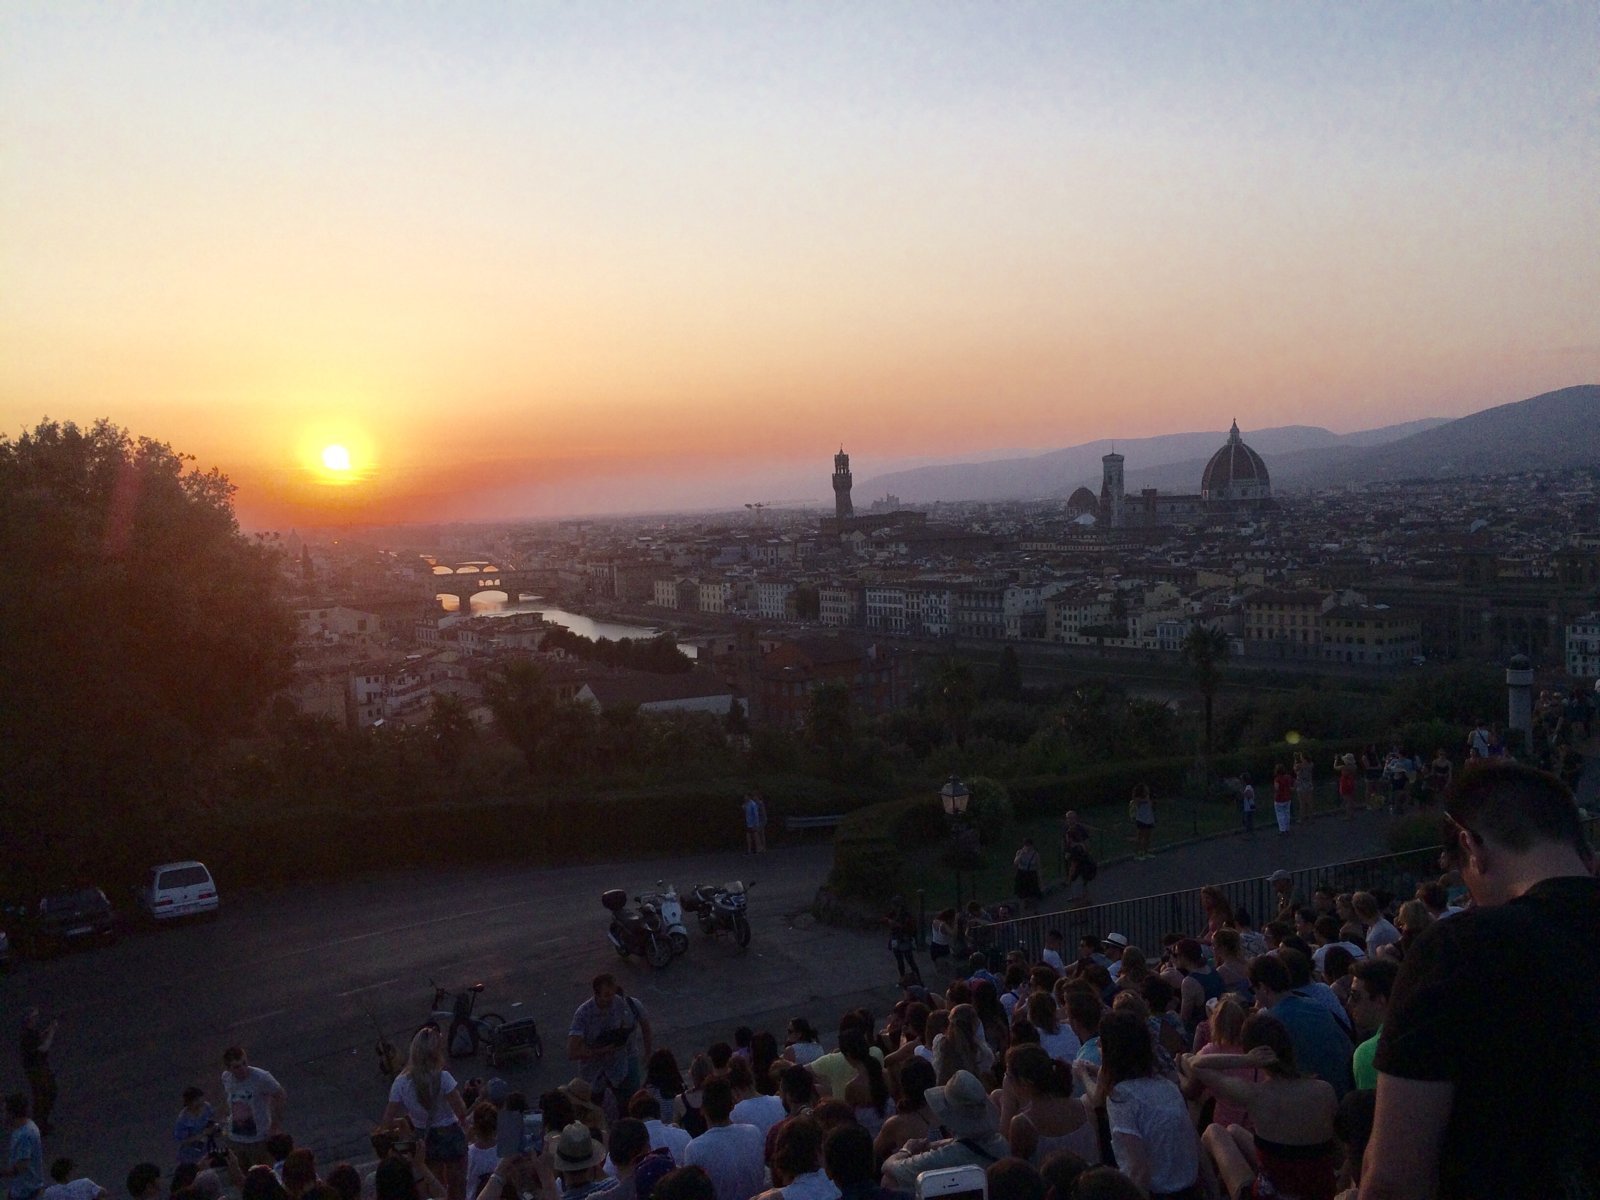 Sunset at Piazzale Michealangelo